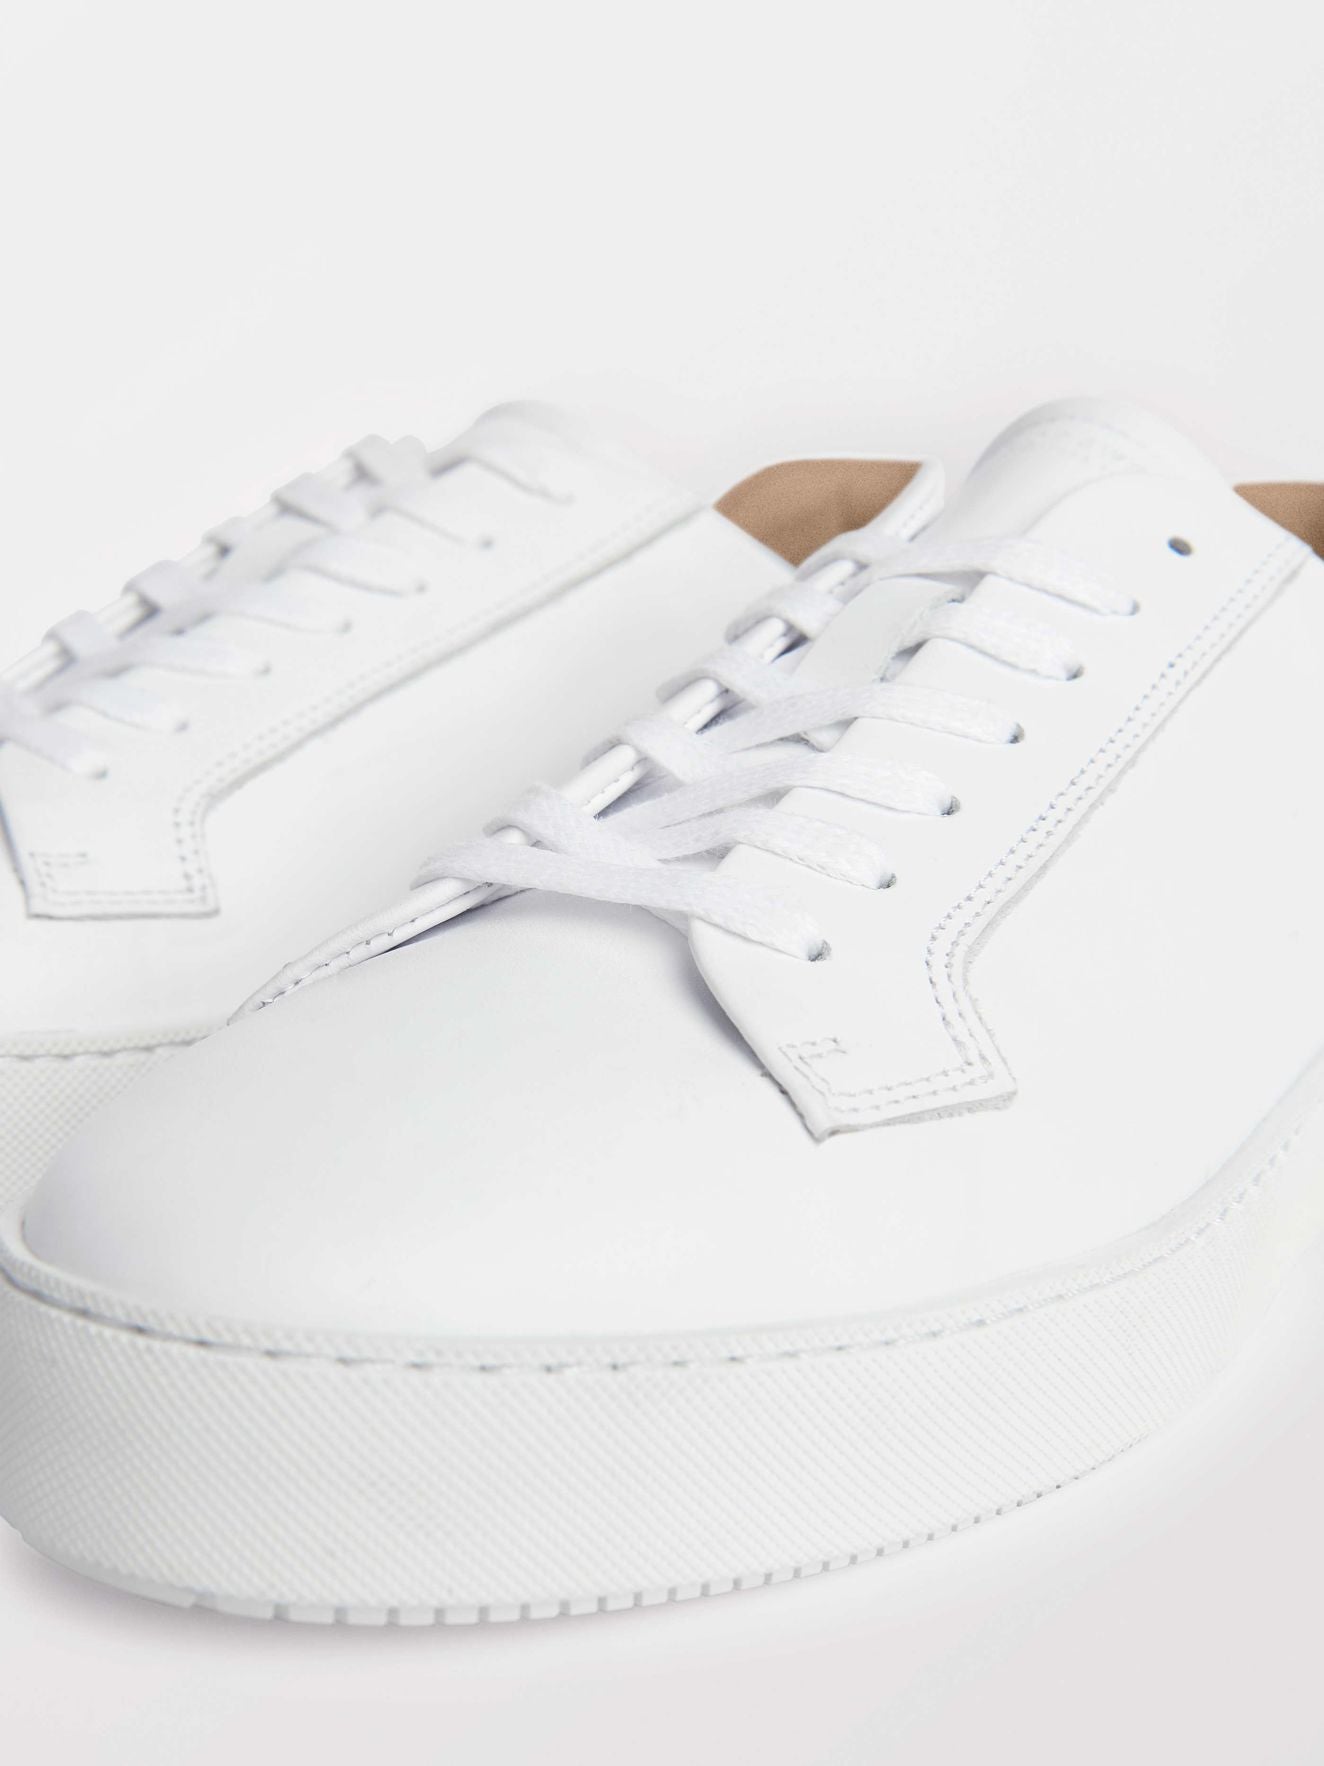 Tiger Of Sweden Salas Sneakers White - Mojo Independent Store